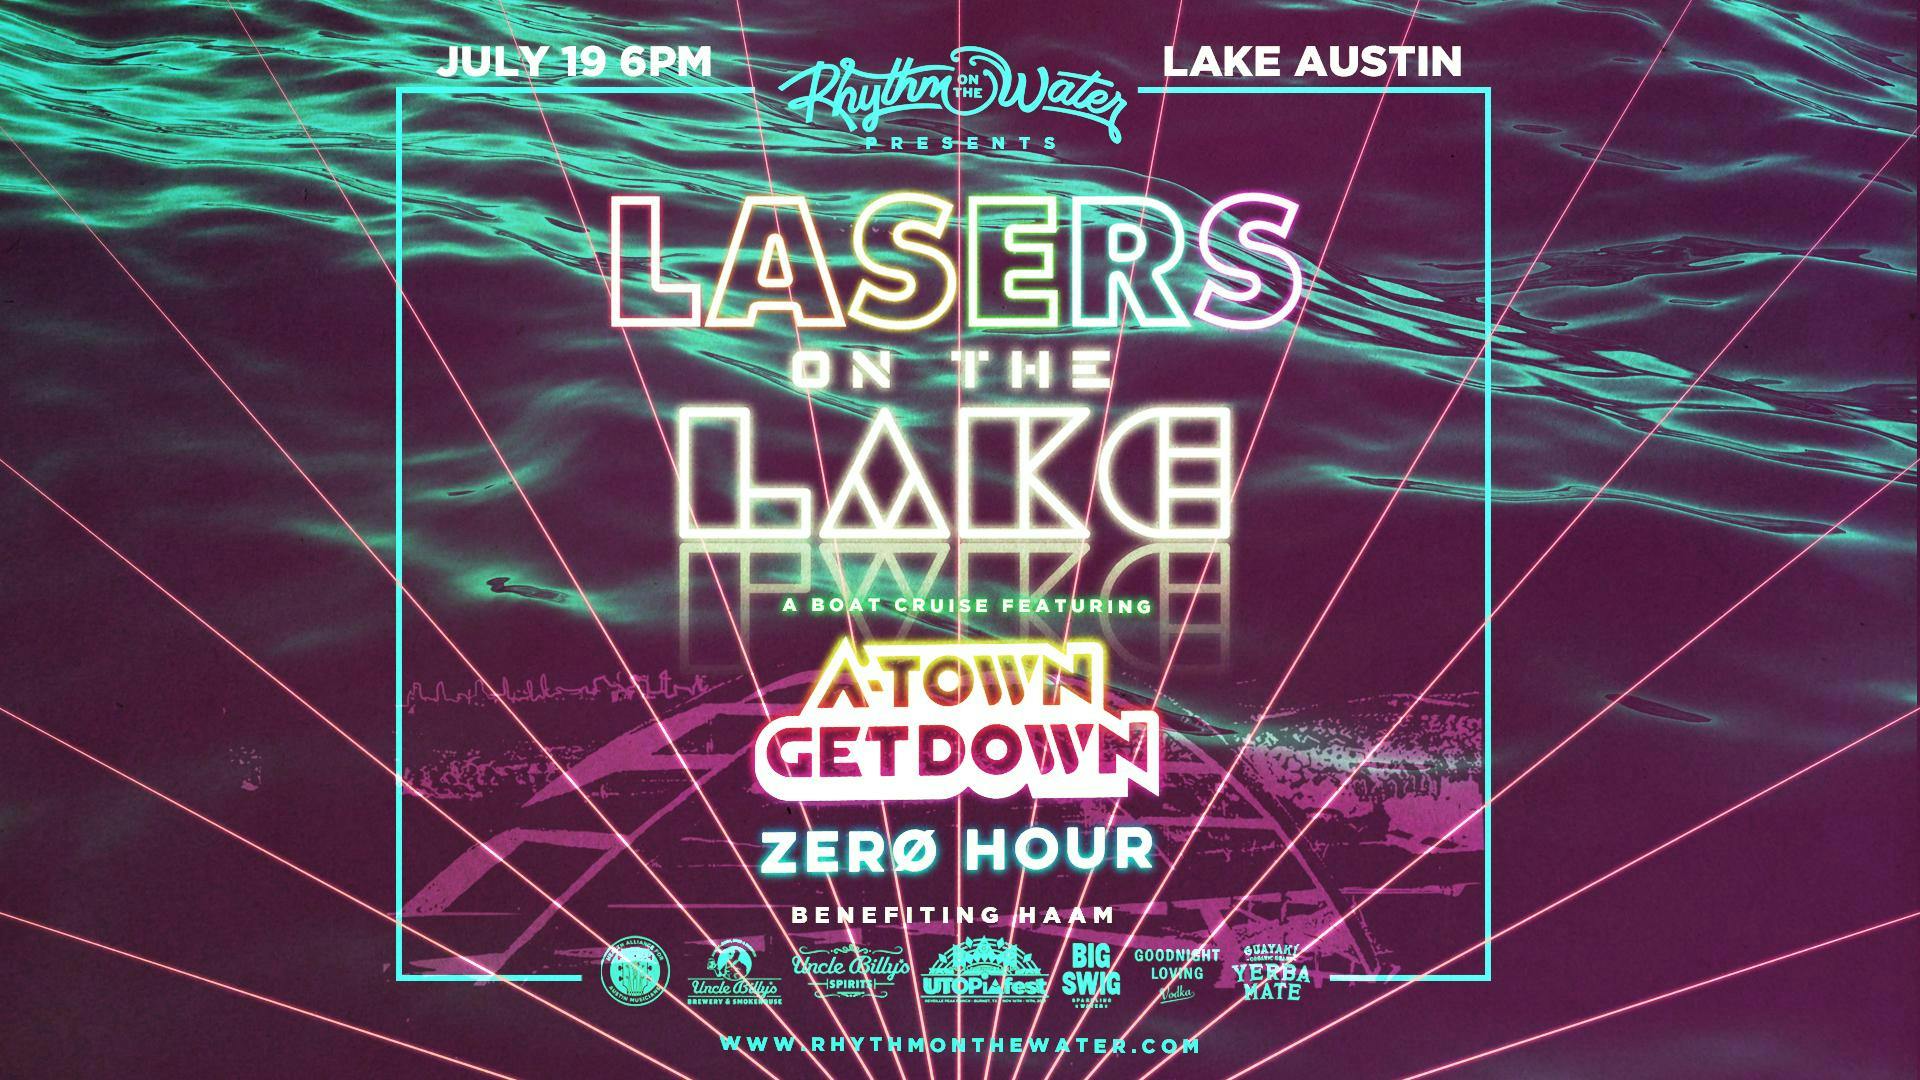 Rhythm on the Water: Lasers on the Lake featuring A-Town GetDown with Zero Hour